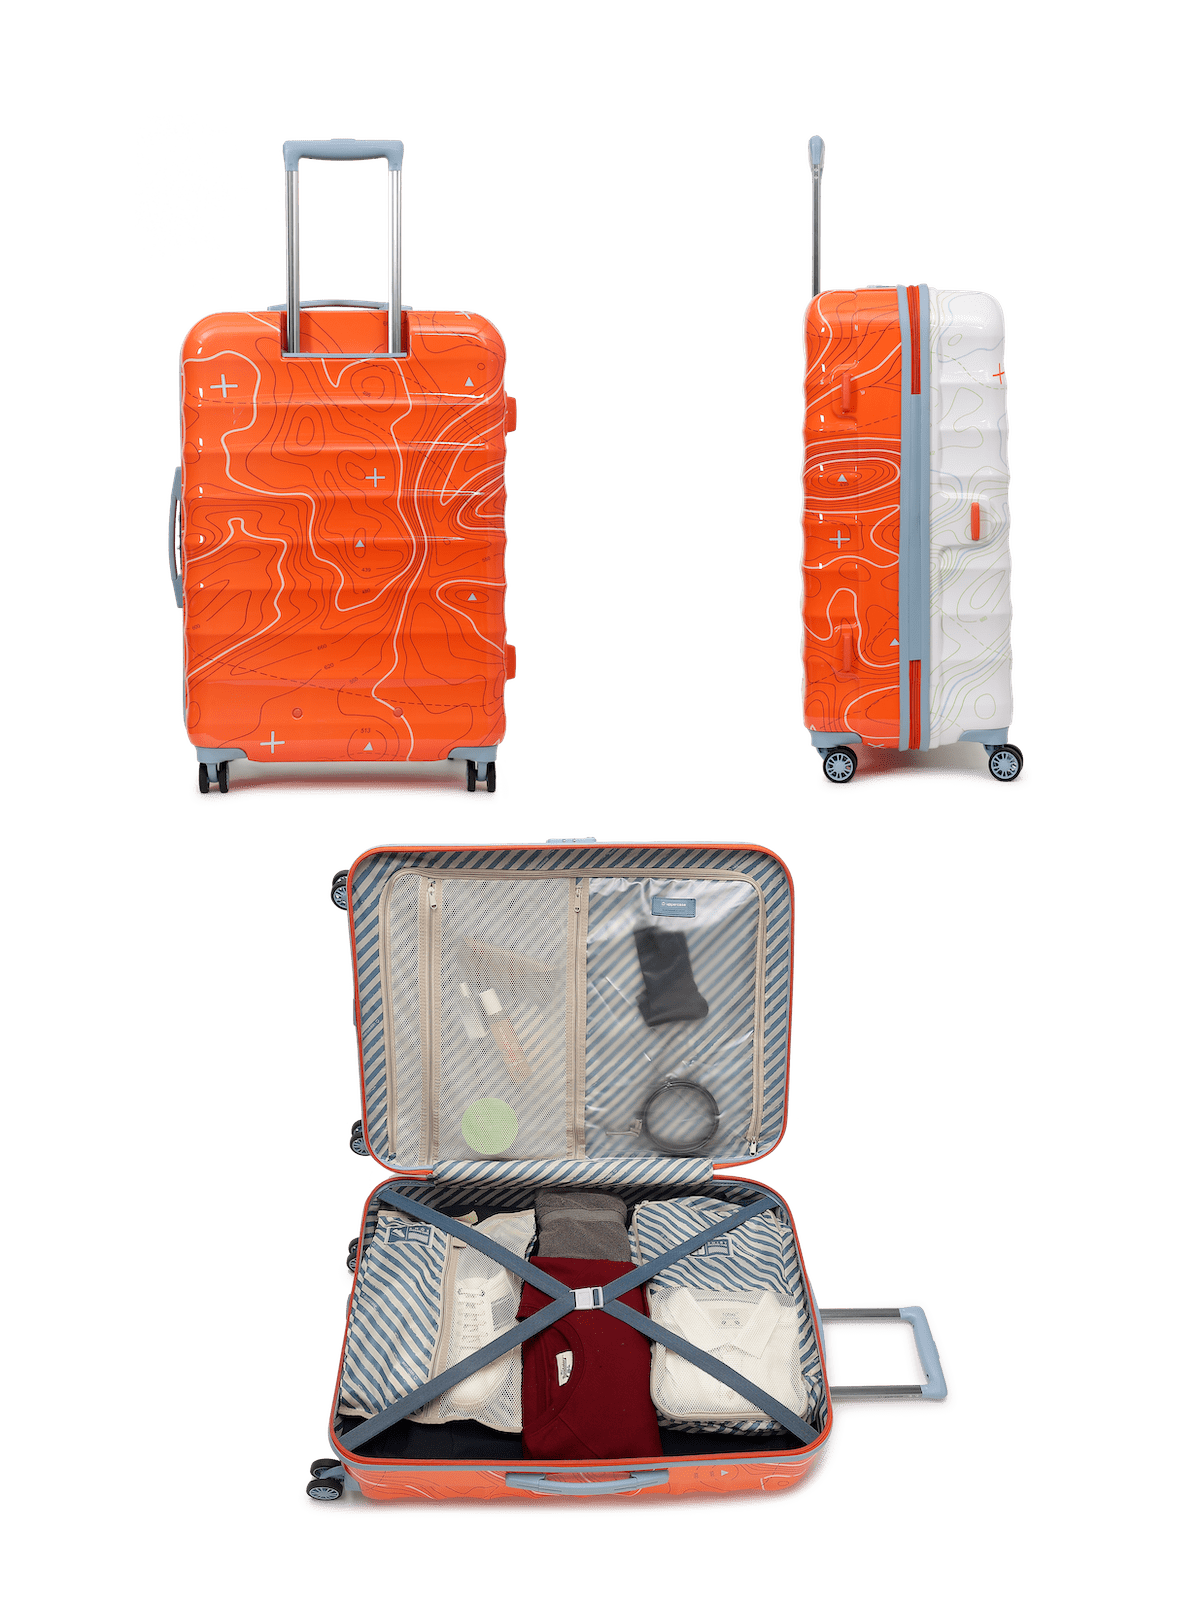 Fambal Waterproof Dust Proof Suitcase Cover Trolley Bag Cover with Zip for  Soft Luggage_Transparent_Size: 20,24,28 Inch_(Pack of 3) : Amazon.in:  Fashion